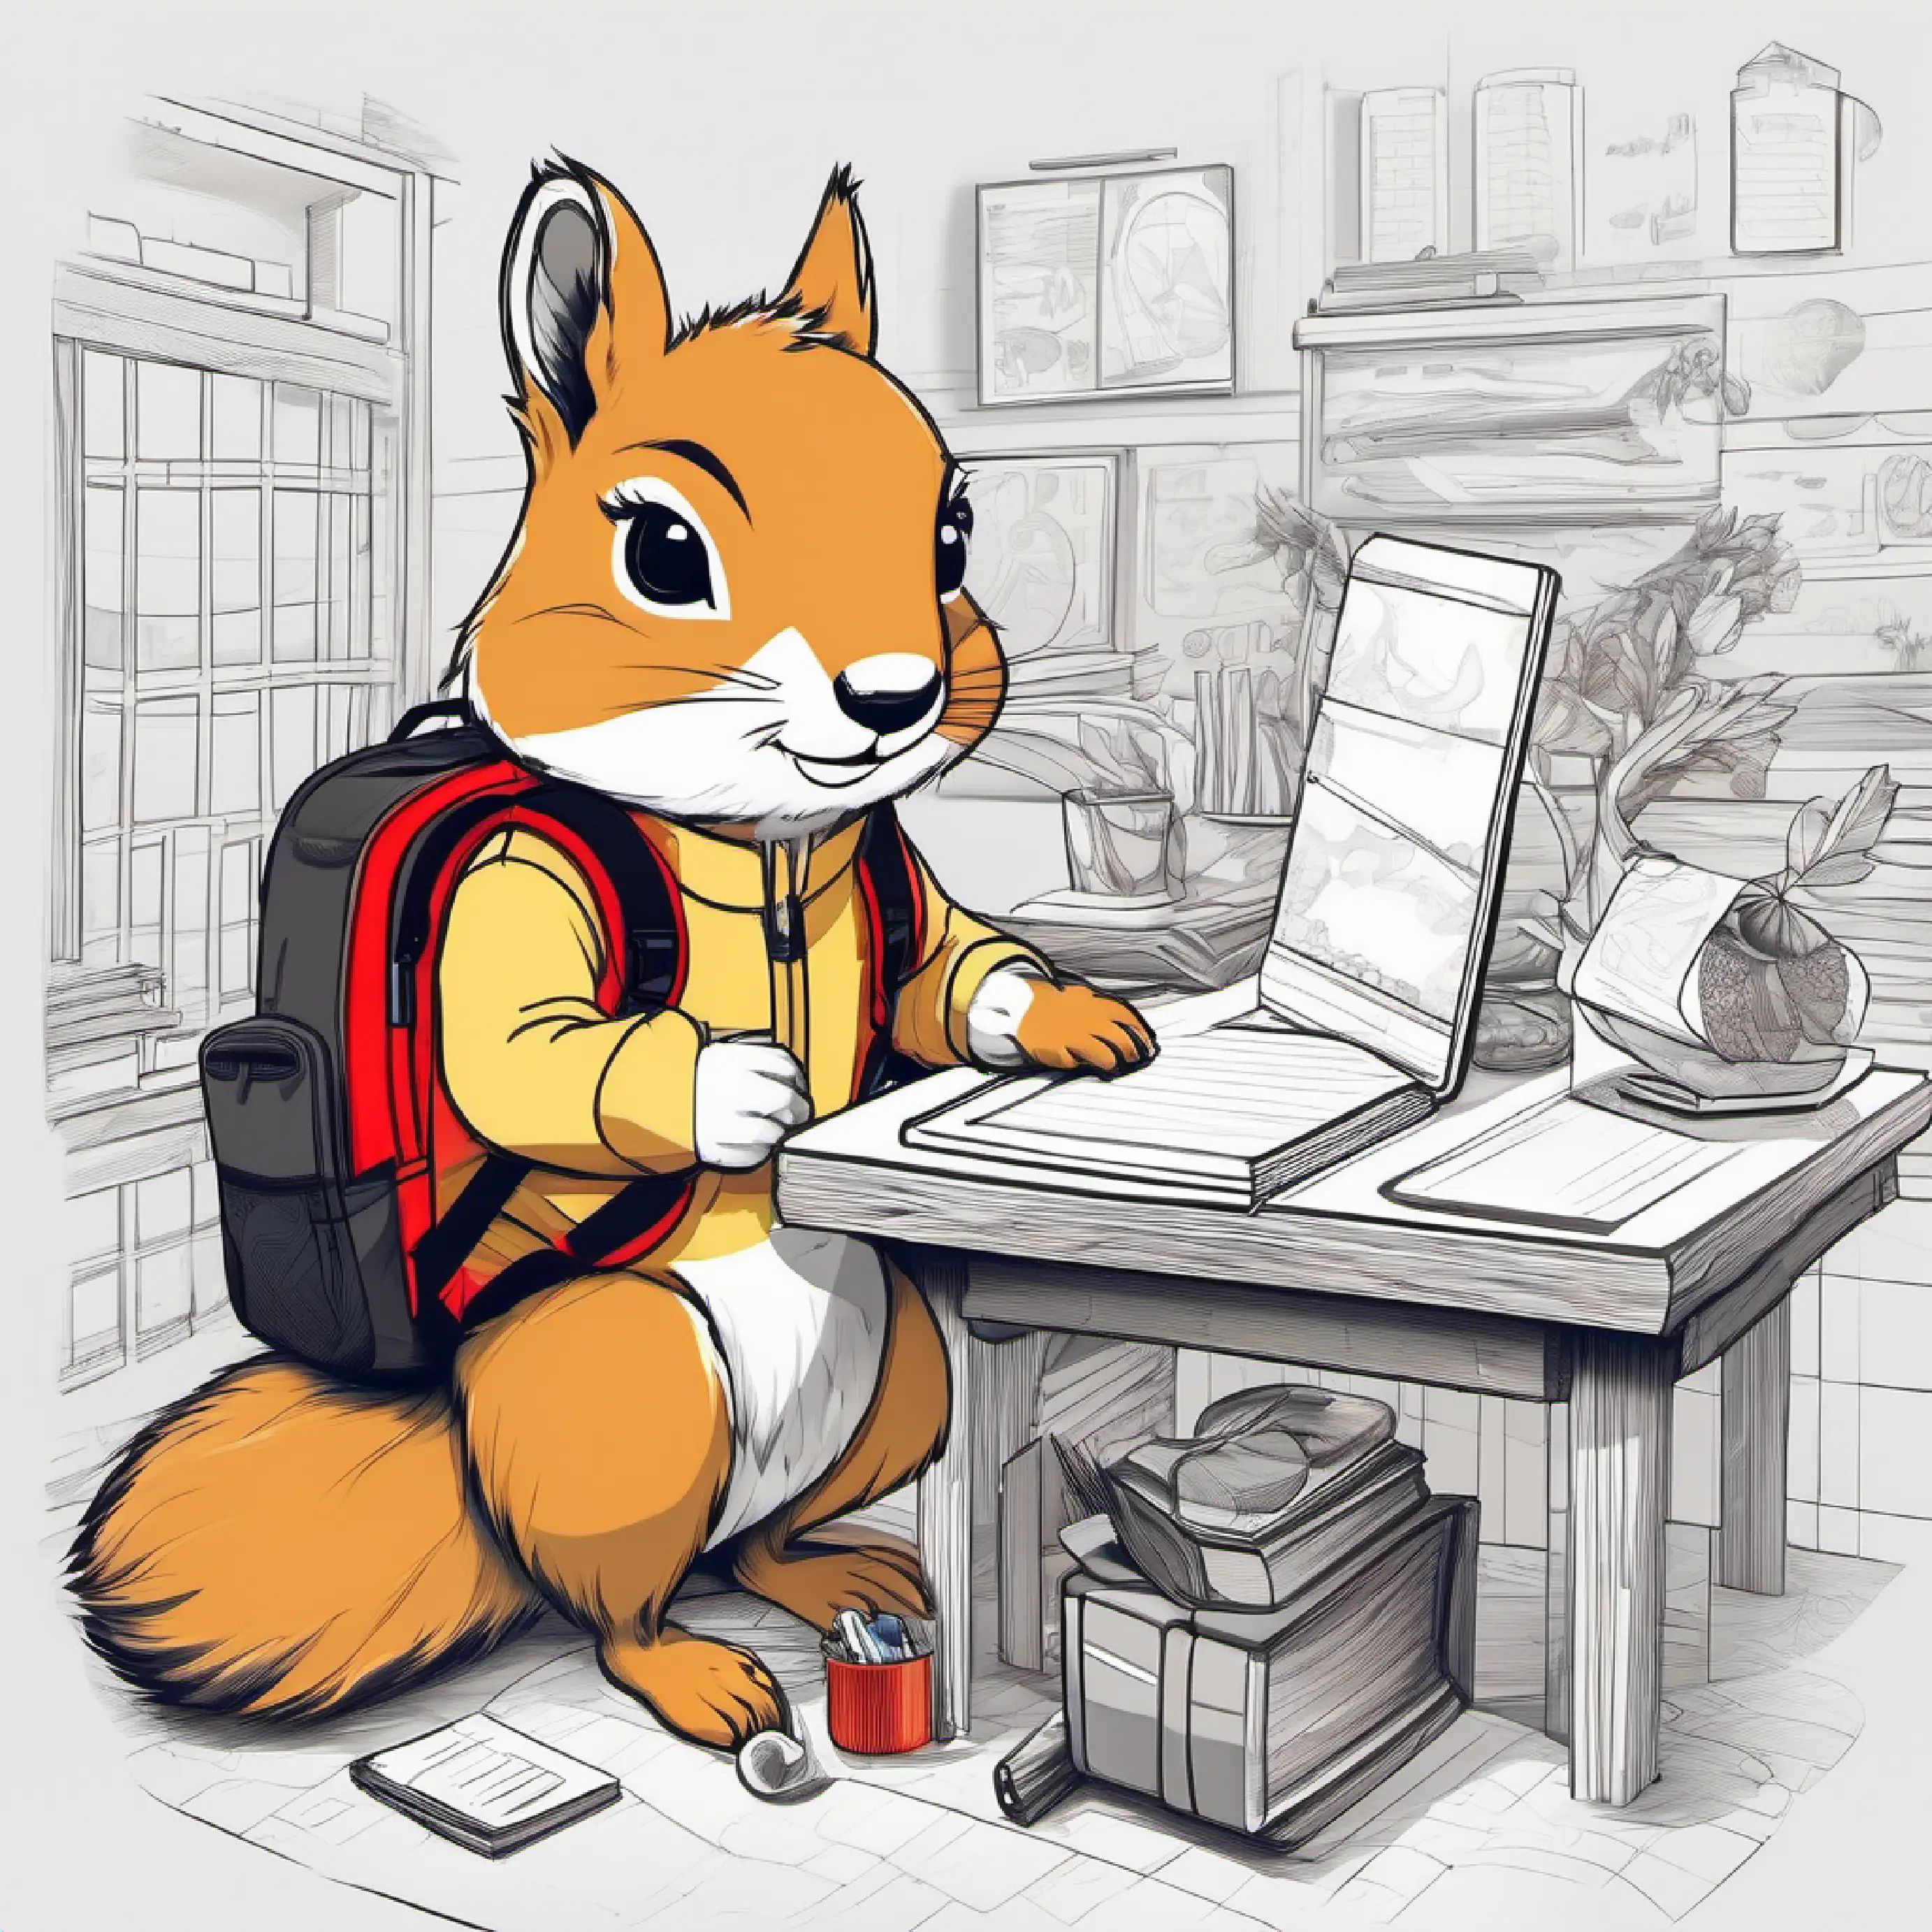 Golden fur, round black eyes, wearing a red backpack sits at his desk next to a squirrel in class.